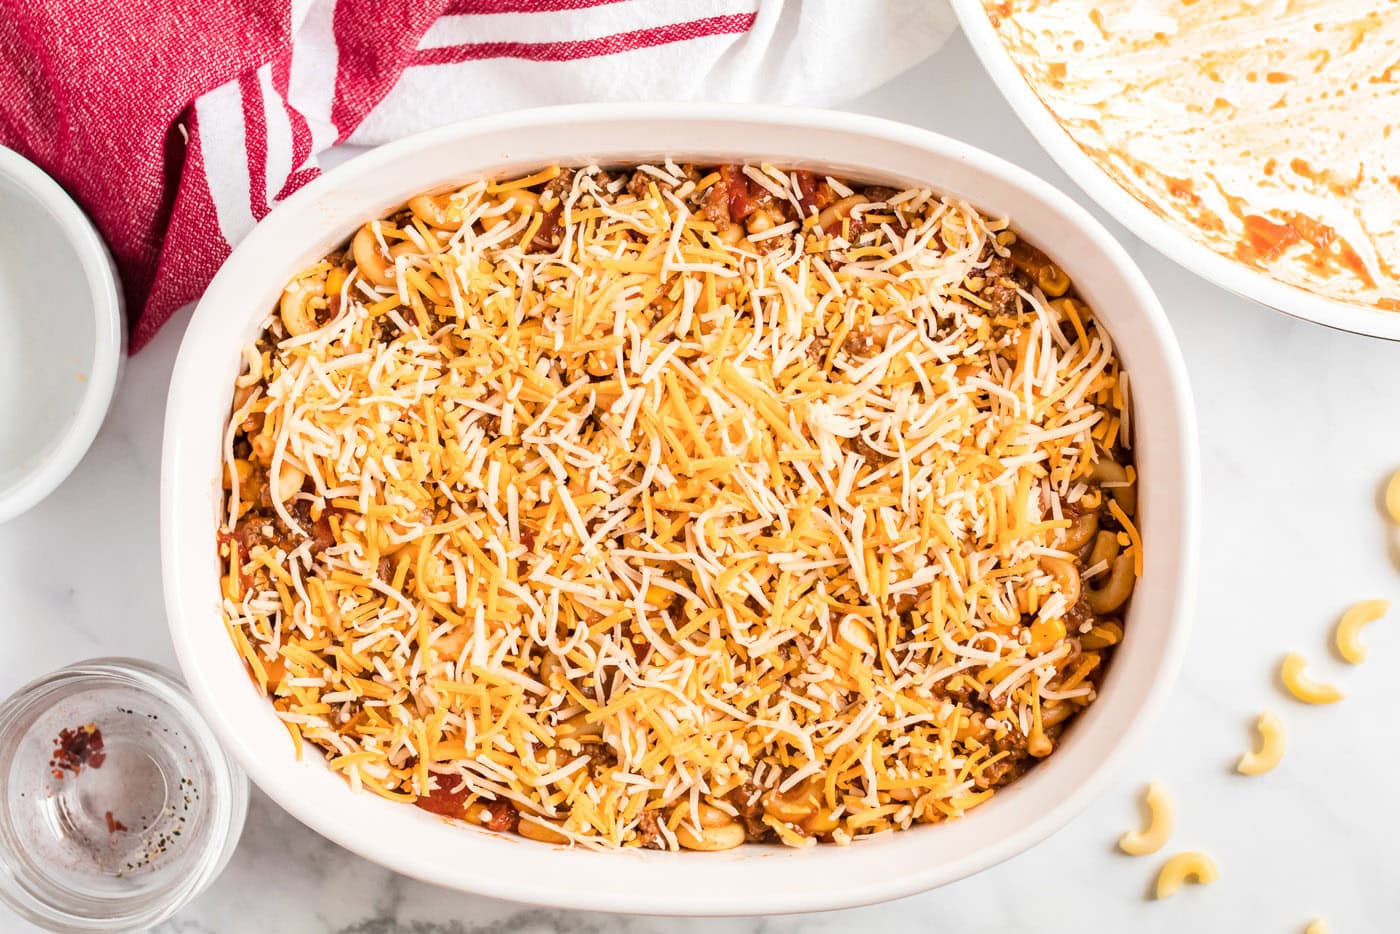 Ground beef casserole in a dish topped with cheese